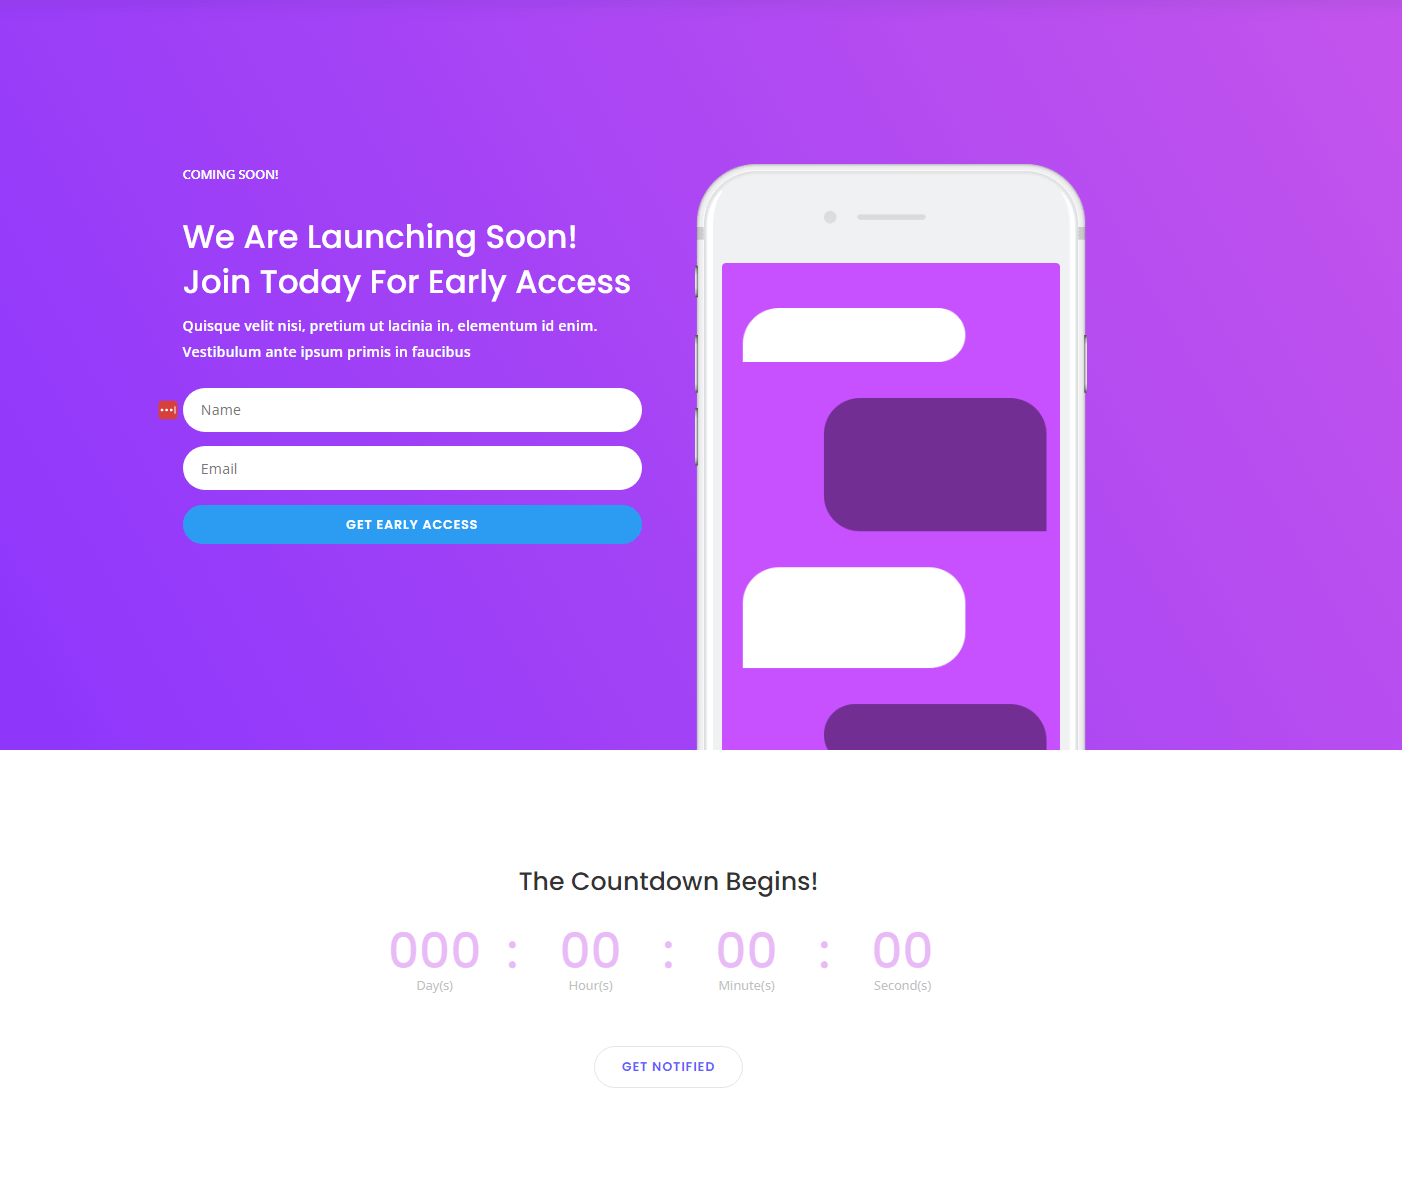 One of Divi's coming soon templates with countdown.